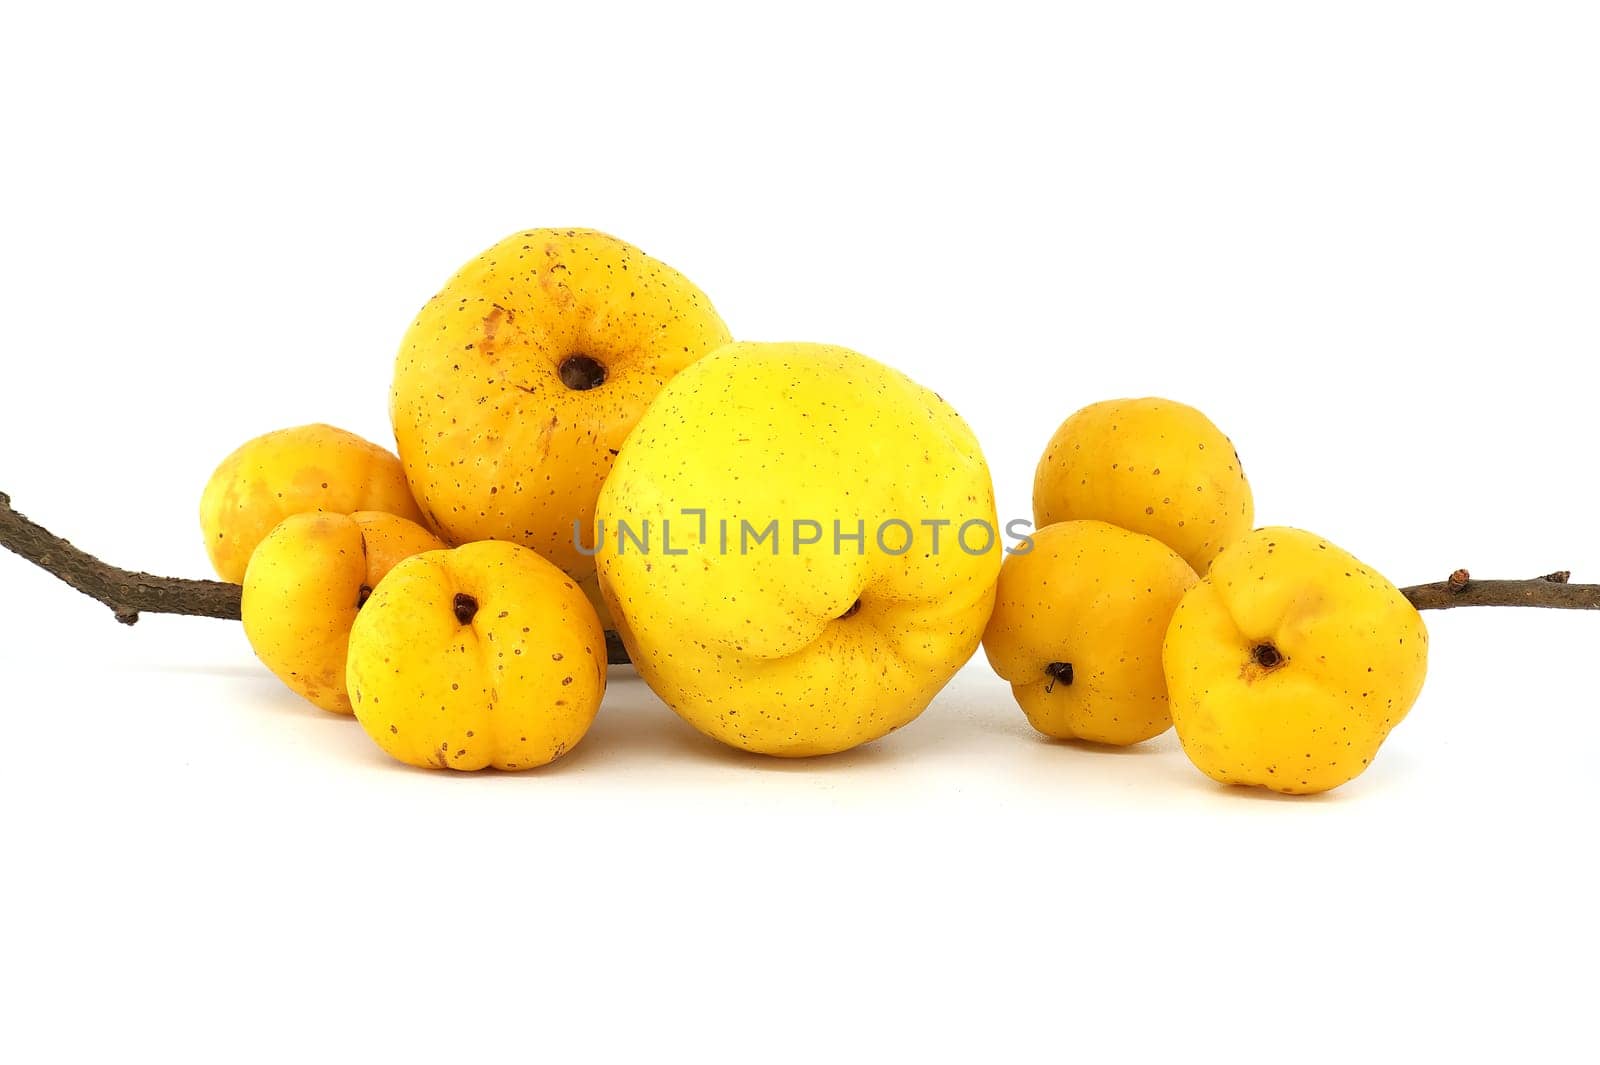 Golden-yellow ripe quince fruits isolated on white by NetPix